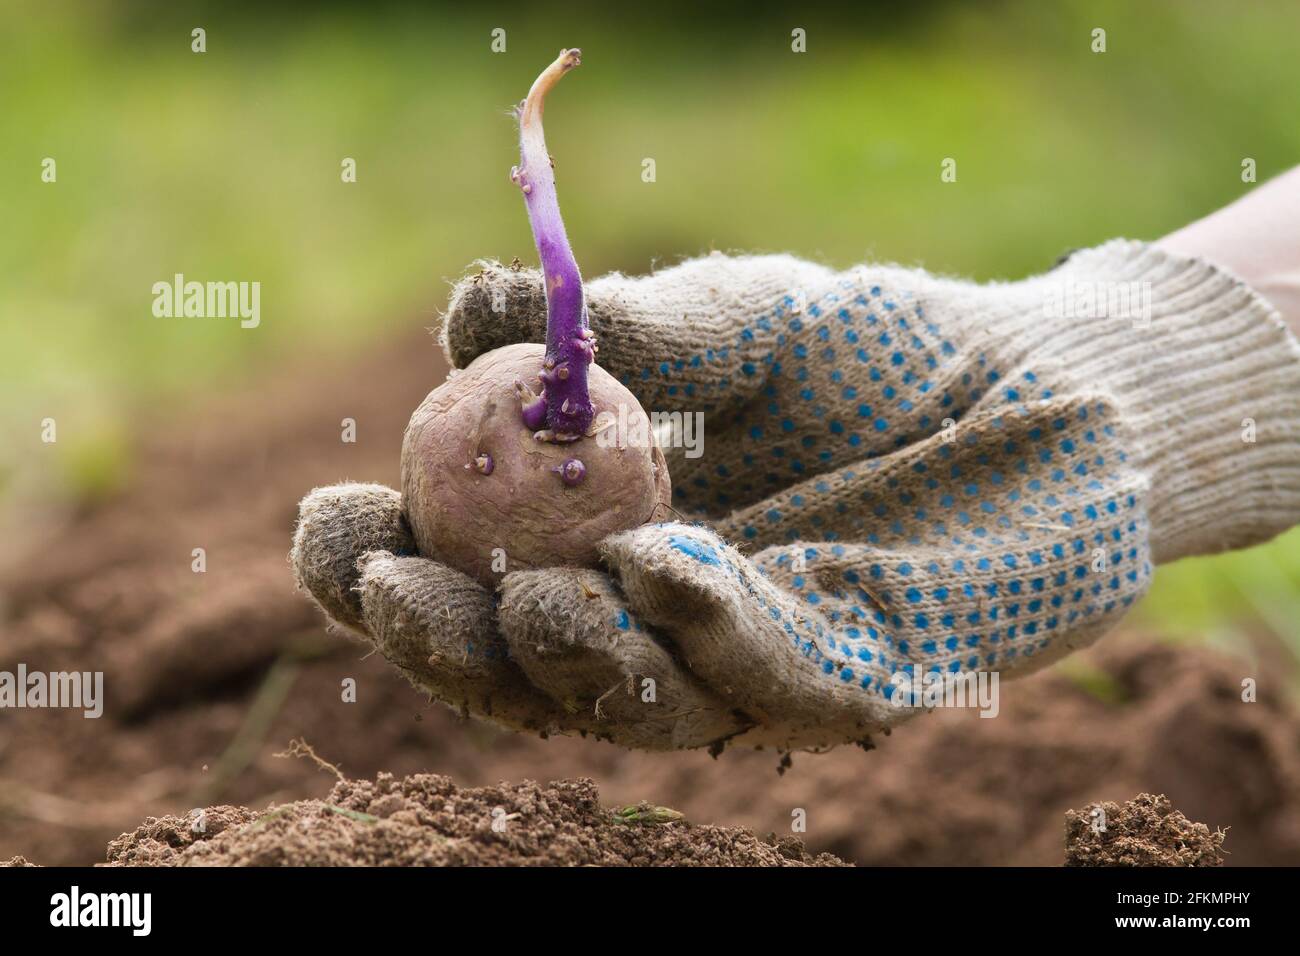 the hand of the farmer is holding a potato tuber with a violet sprout above the bed Stock Photo